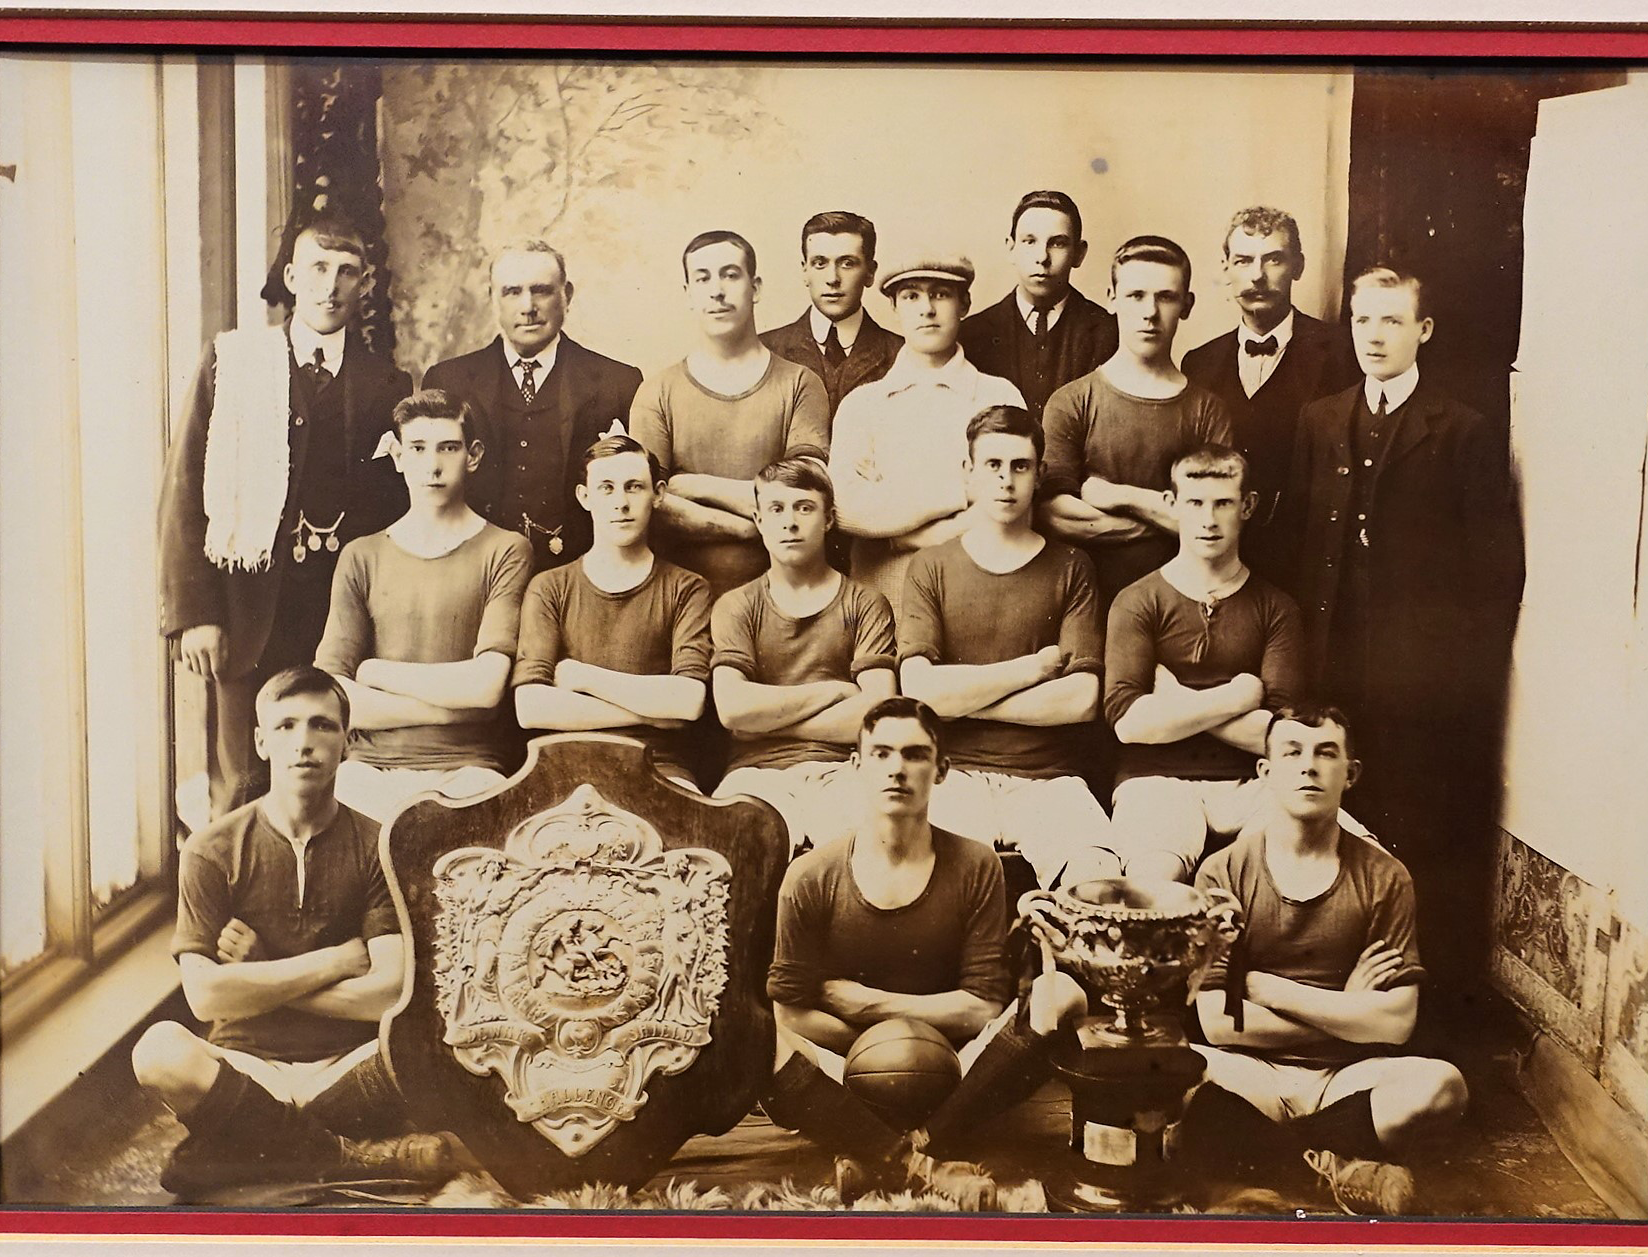 Charlton Athletic Football Club was formed in 1905